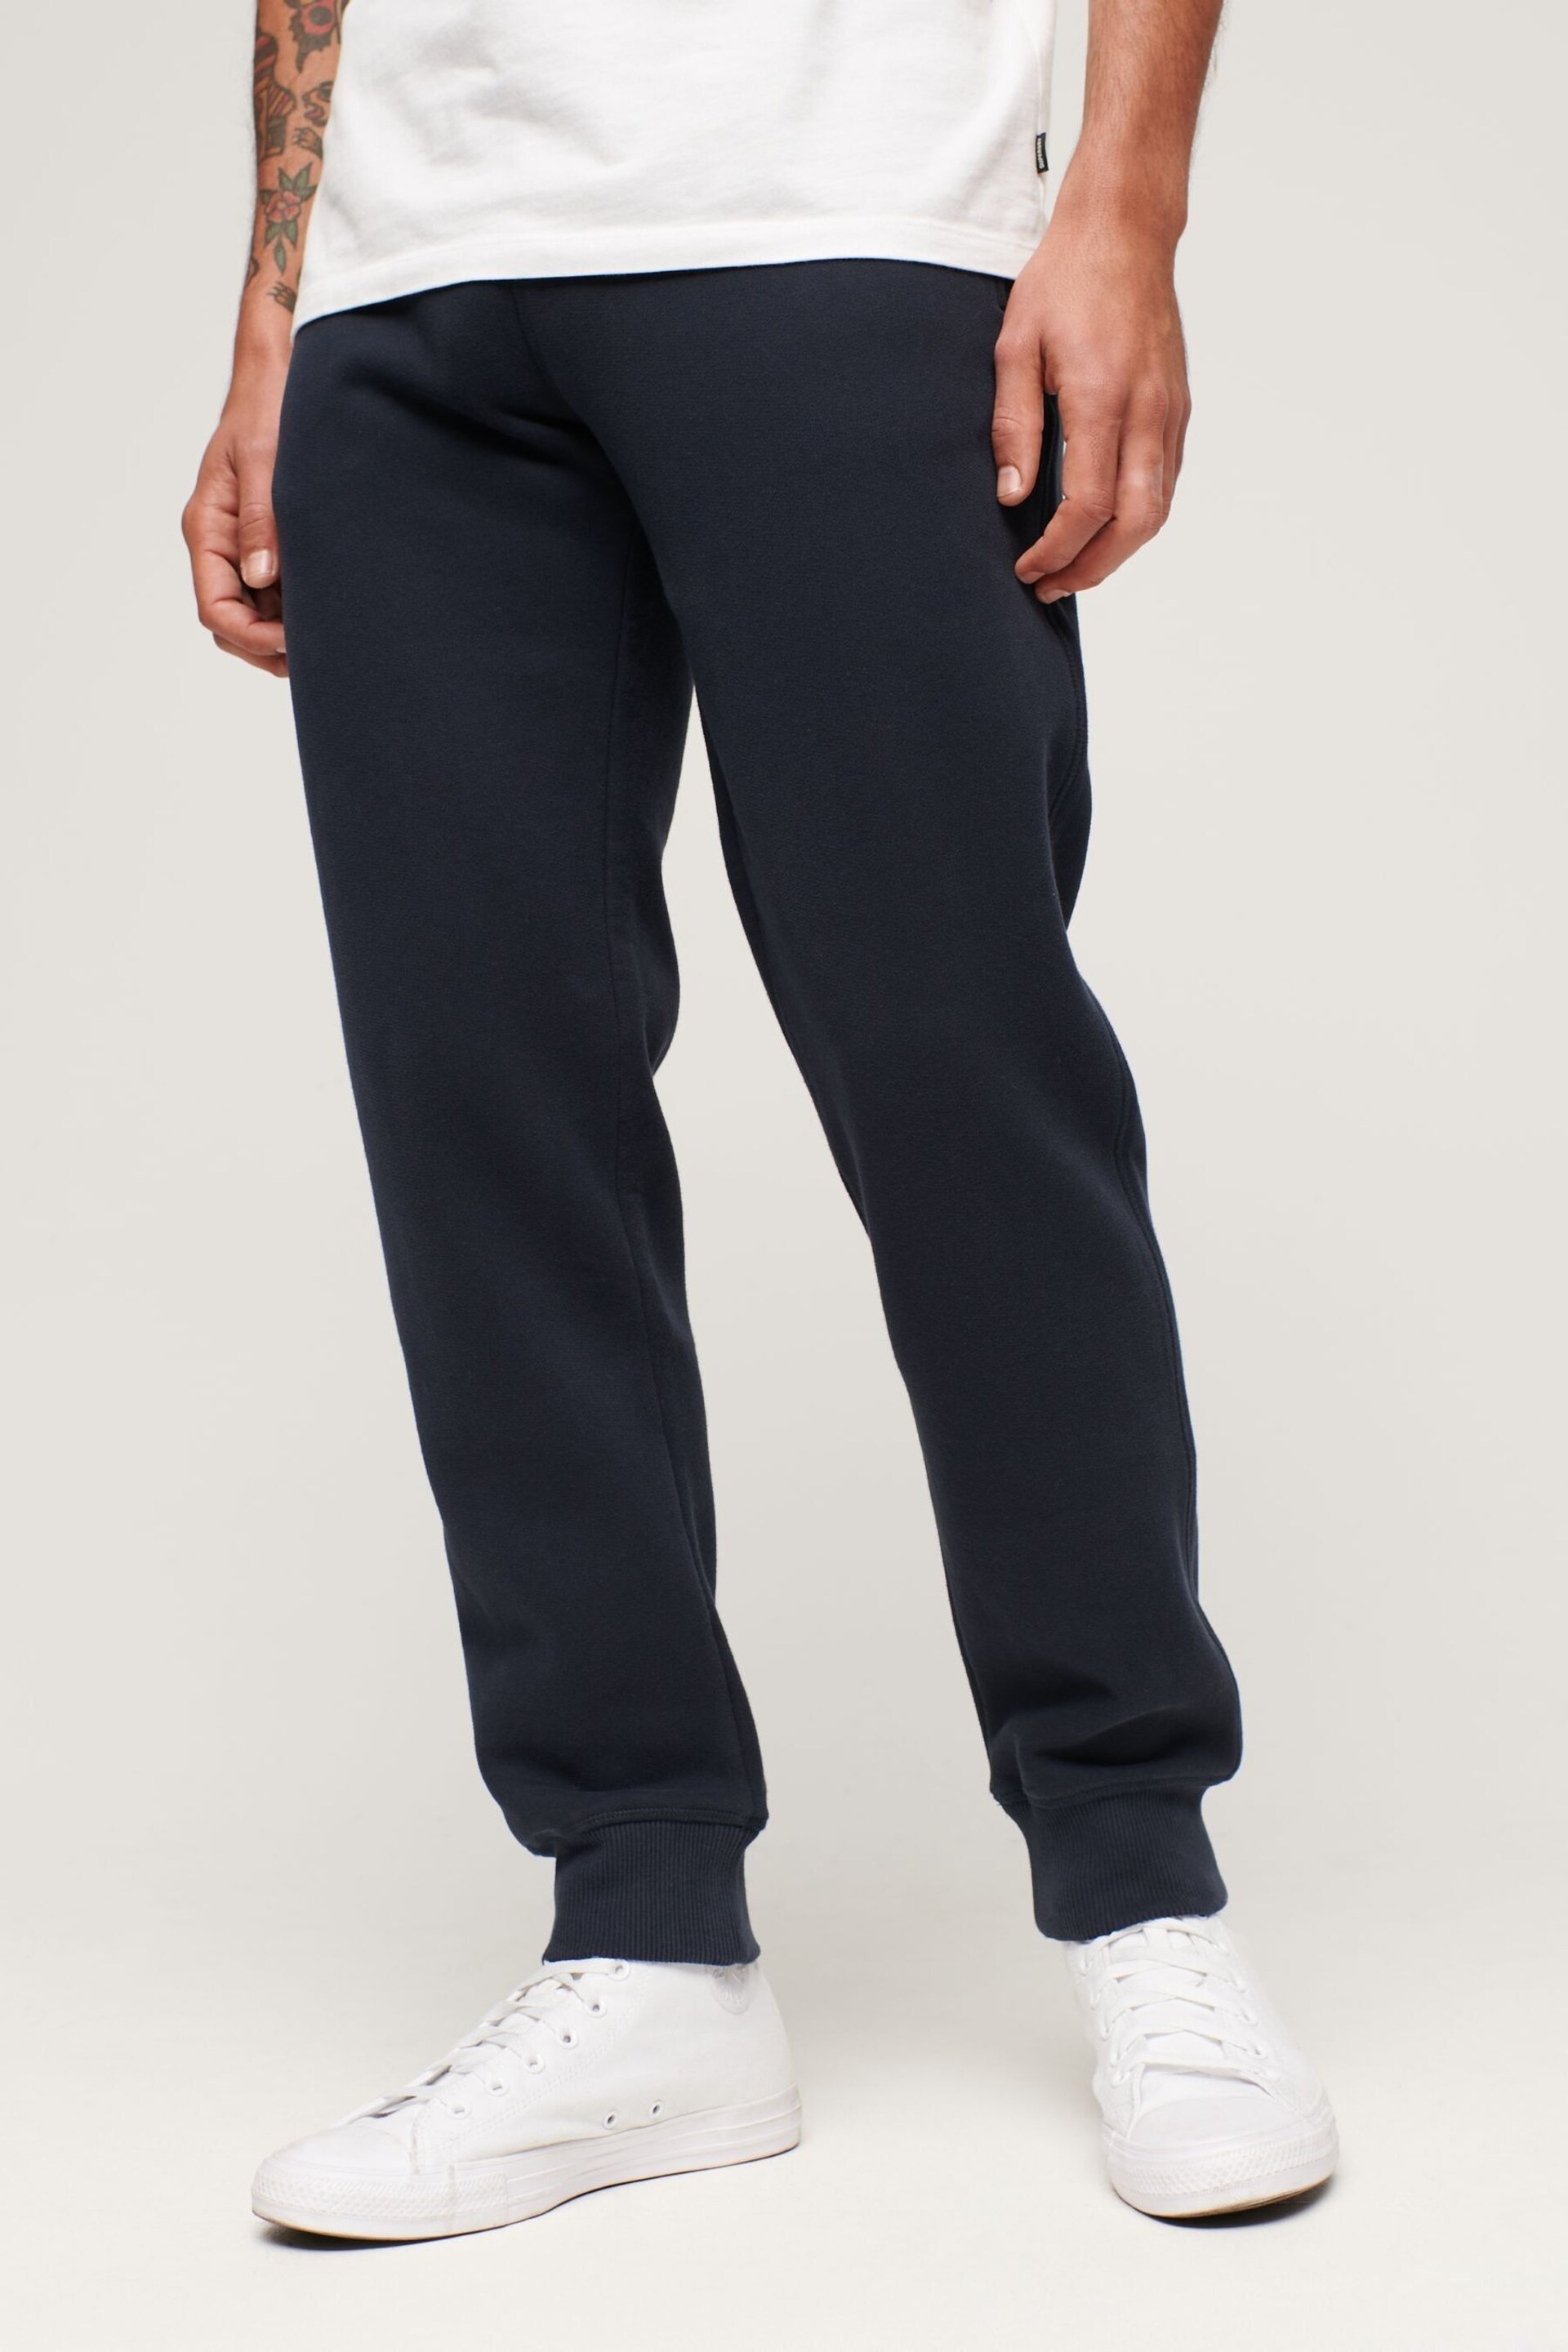 Superdry Navy Blue Essential Logo Joggers - Image 1 of 7